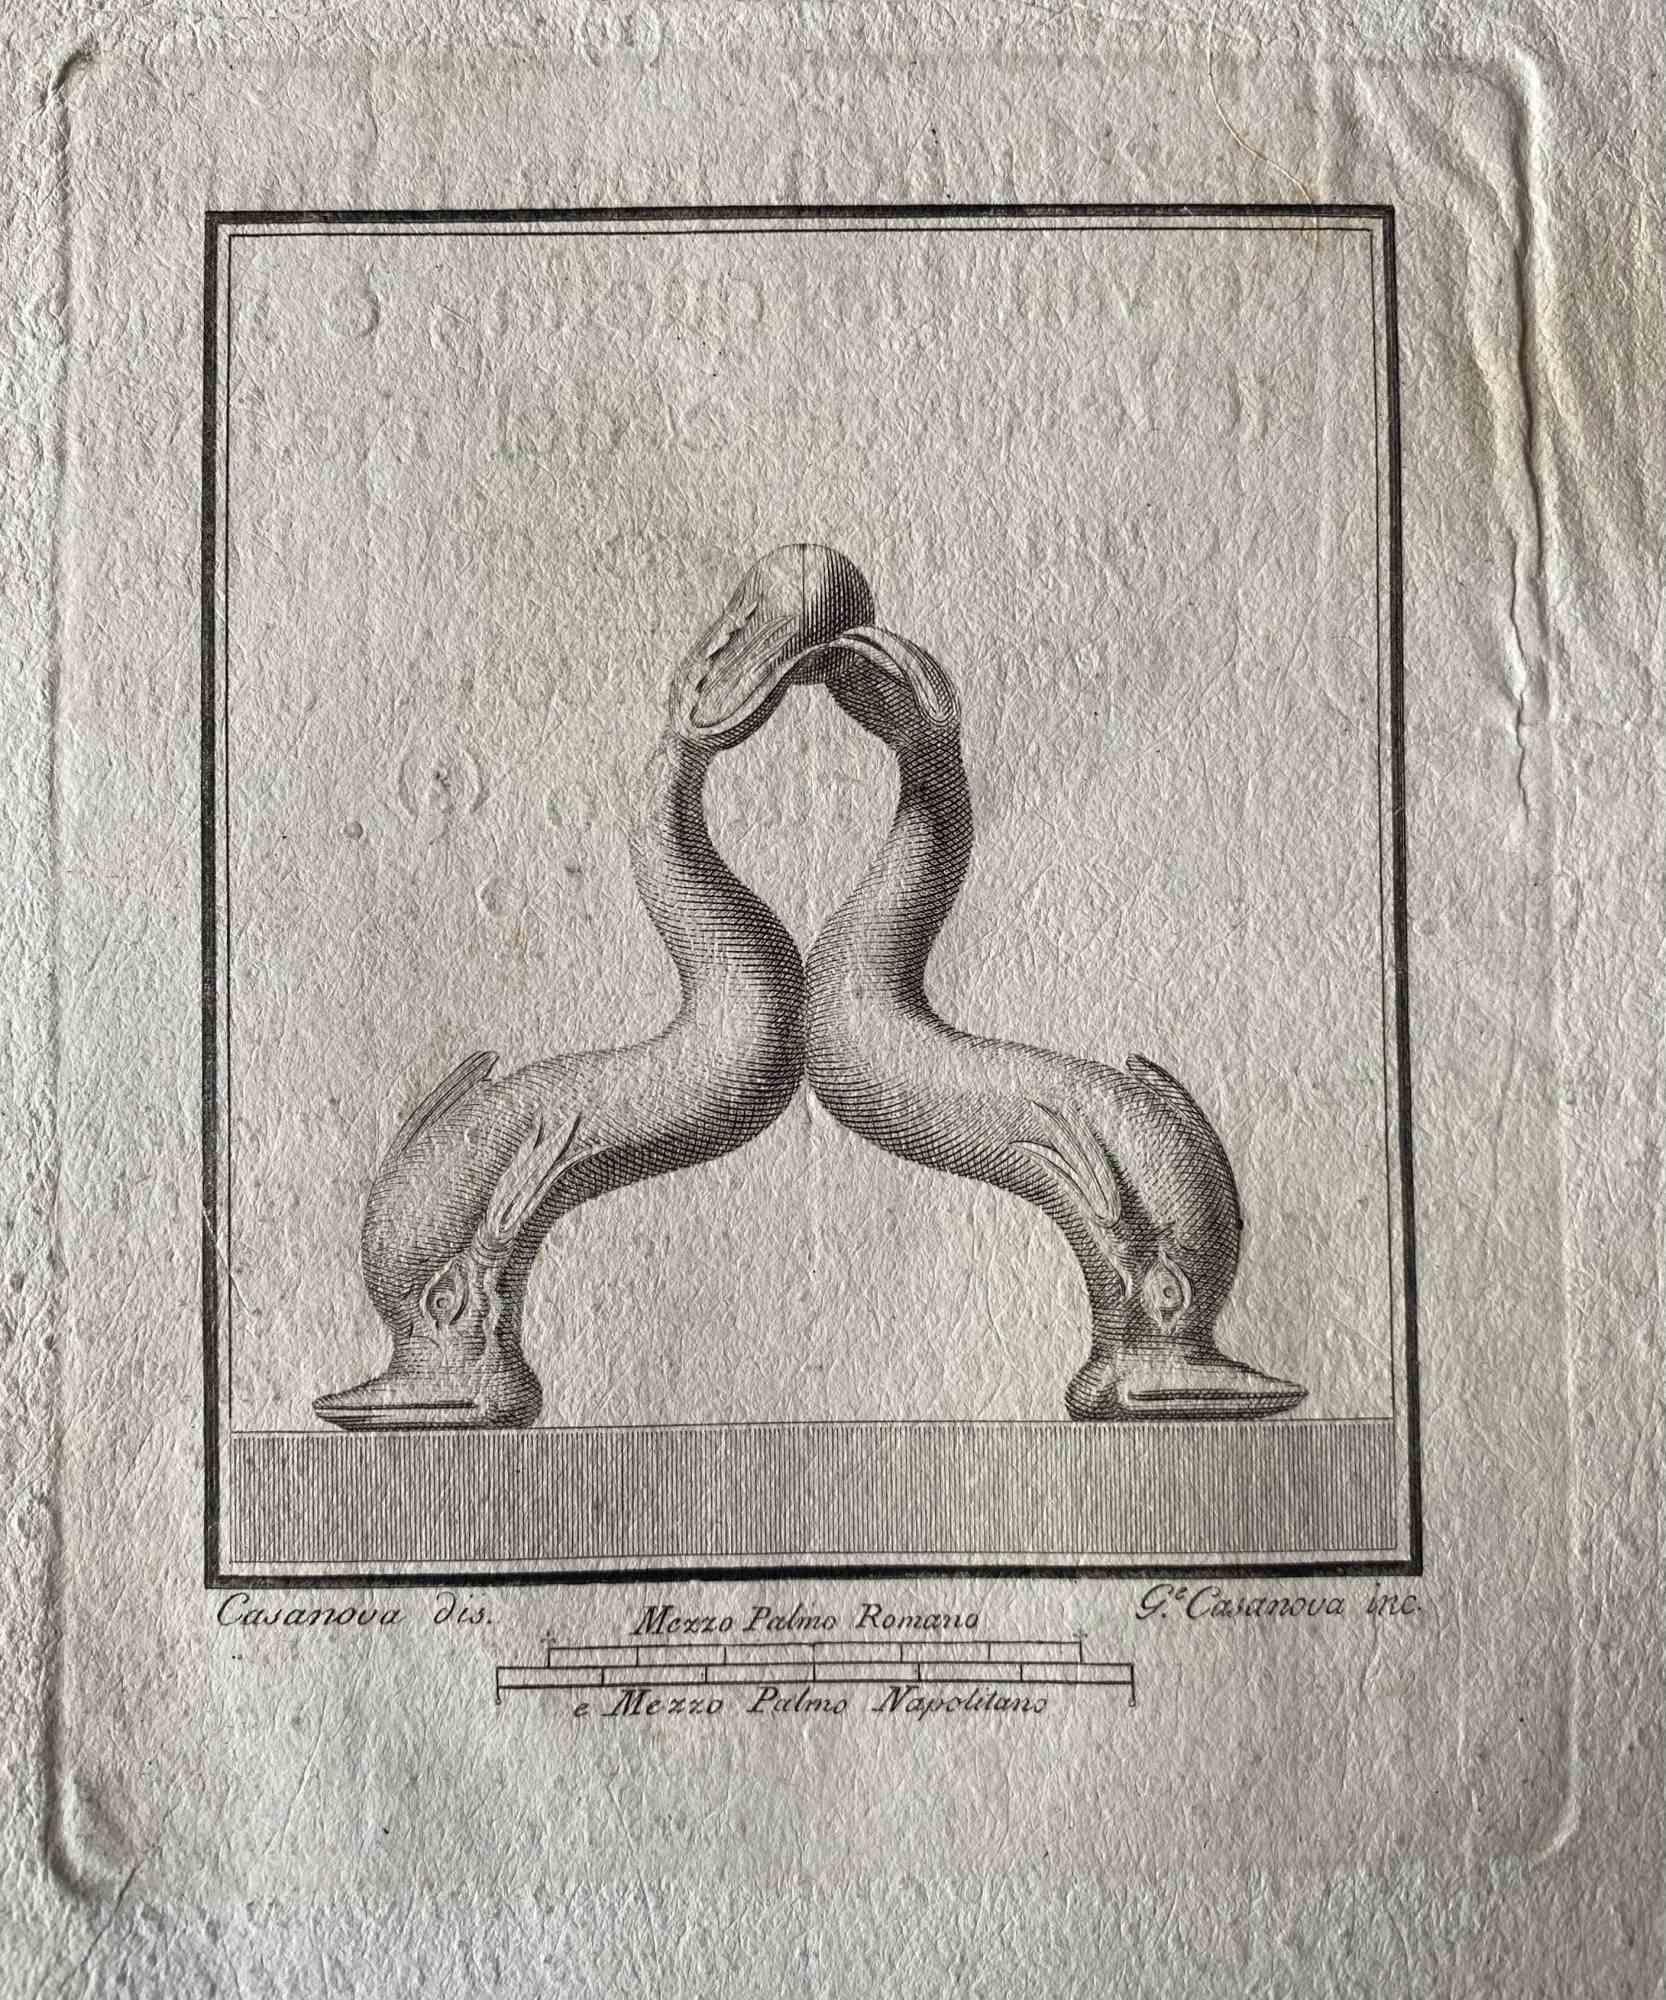 Animal Figures from Ancient Rome, from the Series "The Antiquities of Herculaneum Exposed", is an original etching from the end of the 18th century, made by Various Old Masters.

In very good condition, except for some stains along the margins.

In